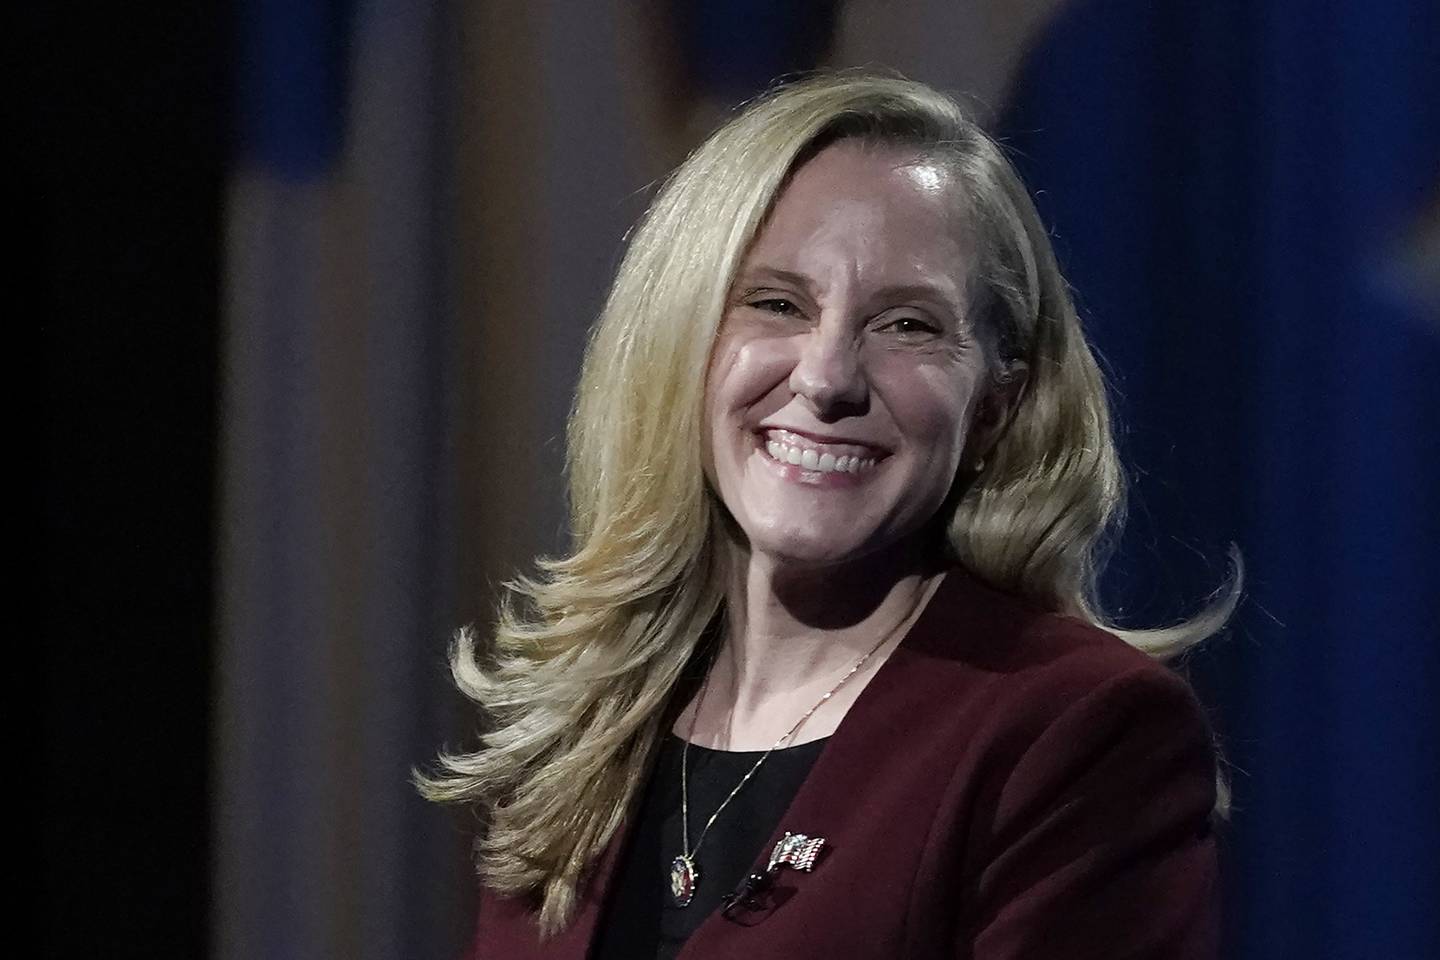 U.S. Rep. Abigail Spanberger, D-Va., smiles during a Chamber RVA sponsored candidate forum with Republican challenger Del. Nick Freitas, R-Culpeper, in Richmond, Va., Tuesday Oct. 20, 2020.